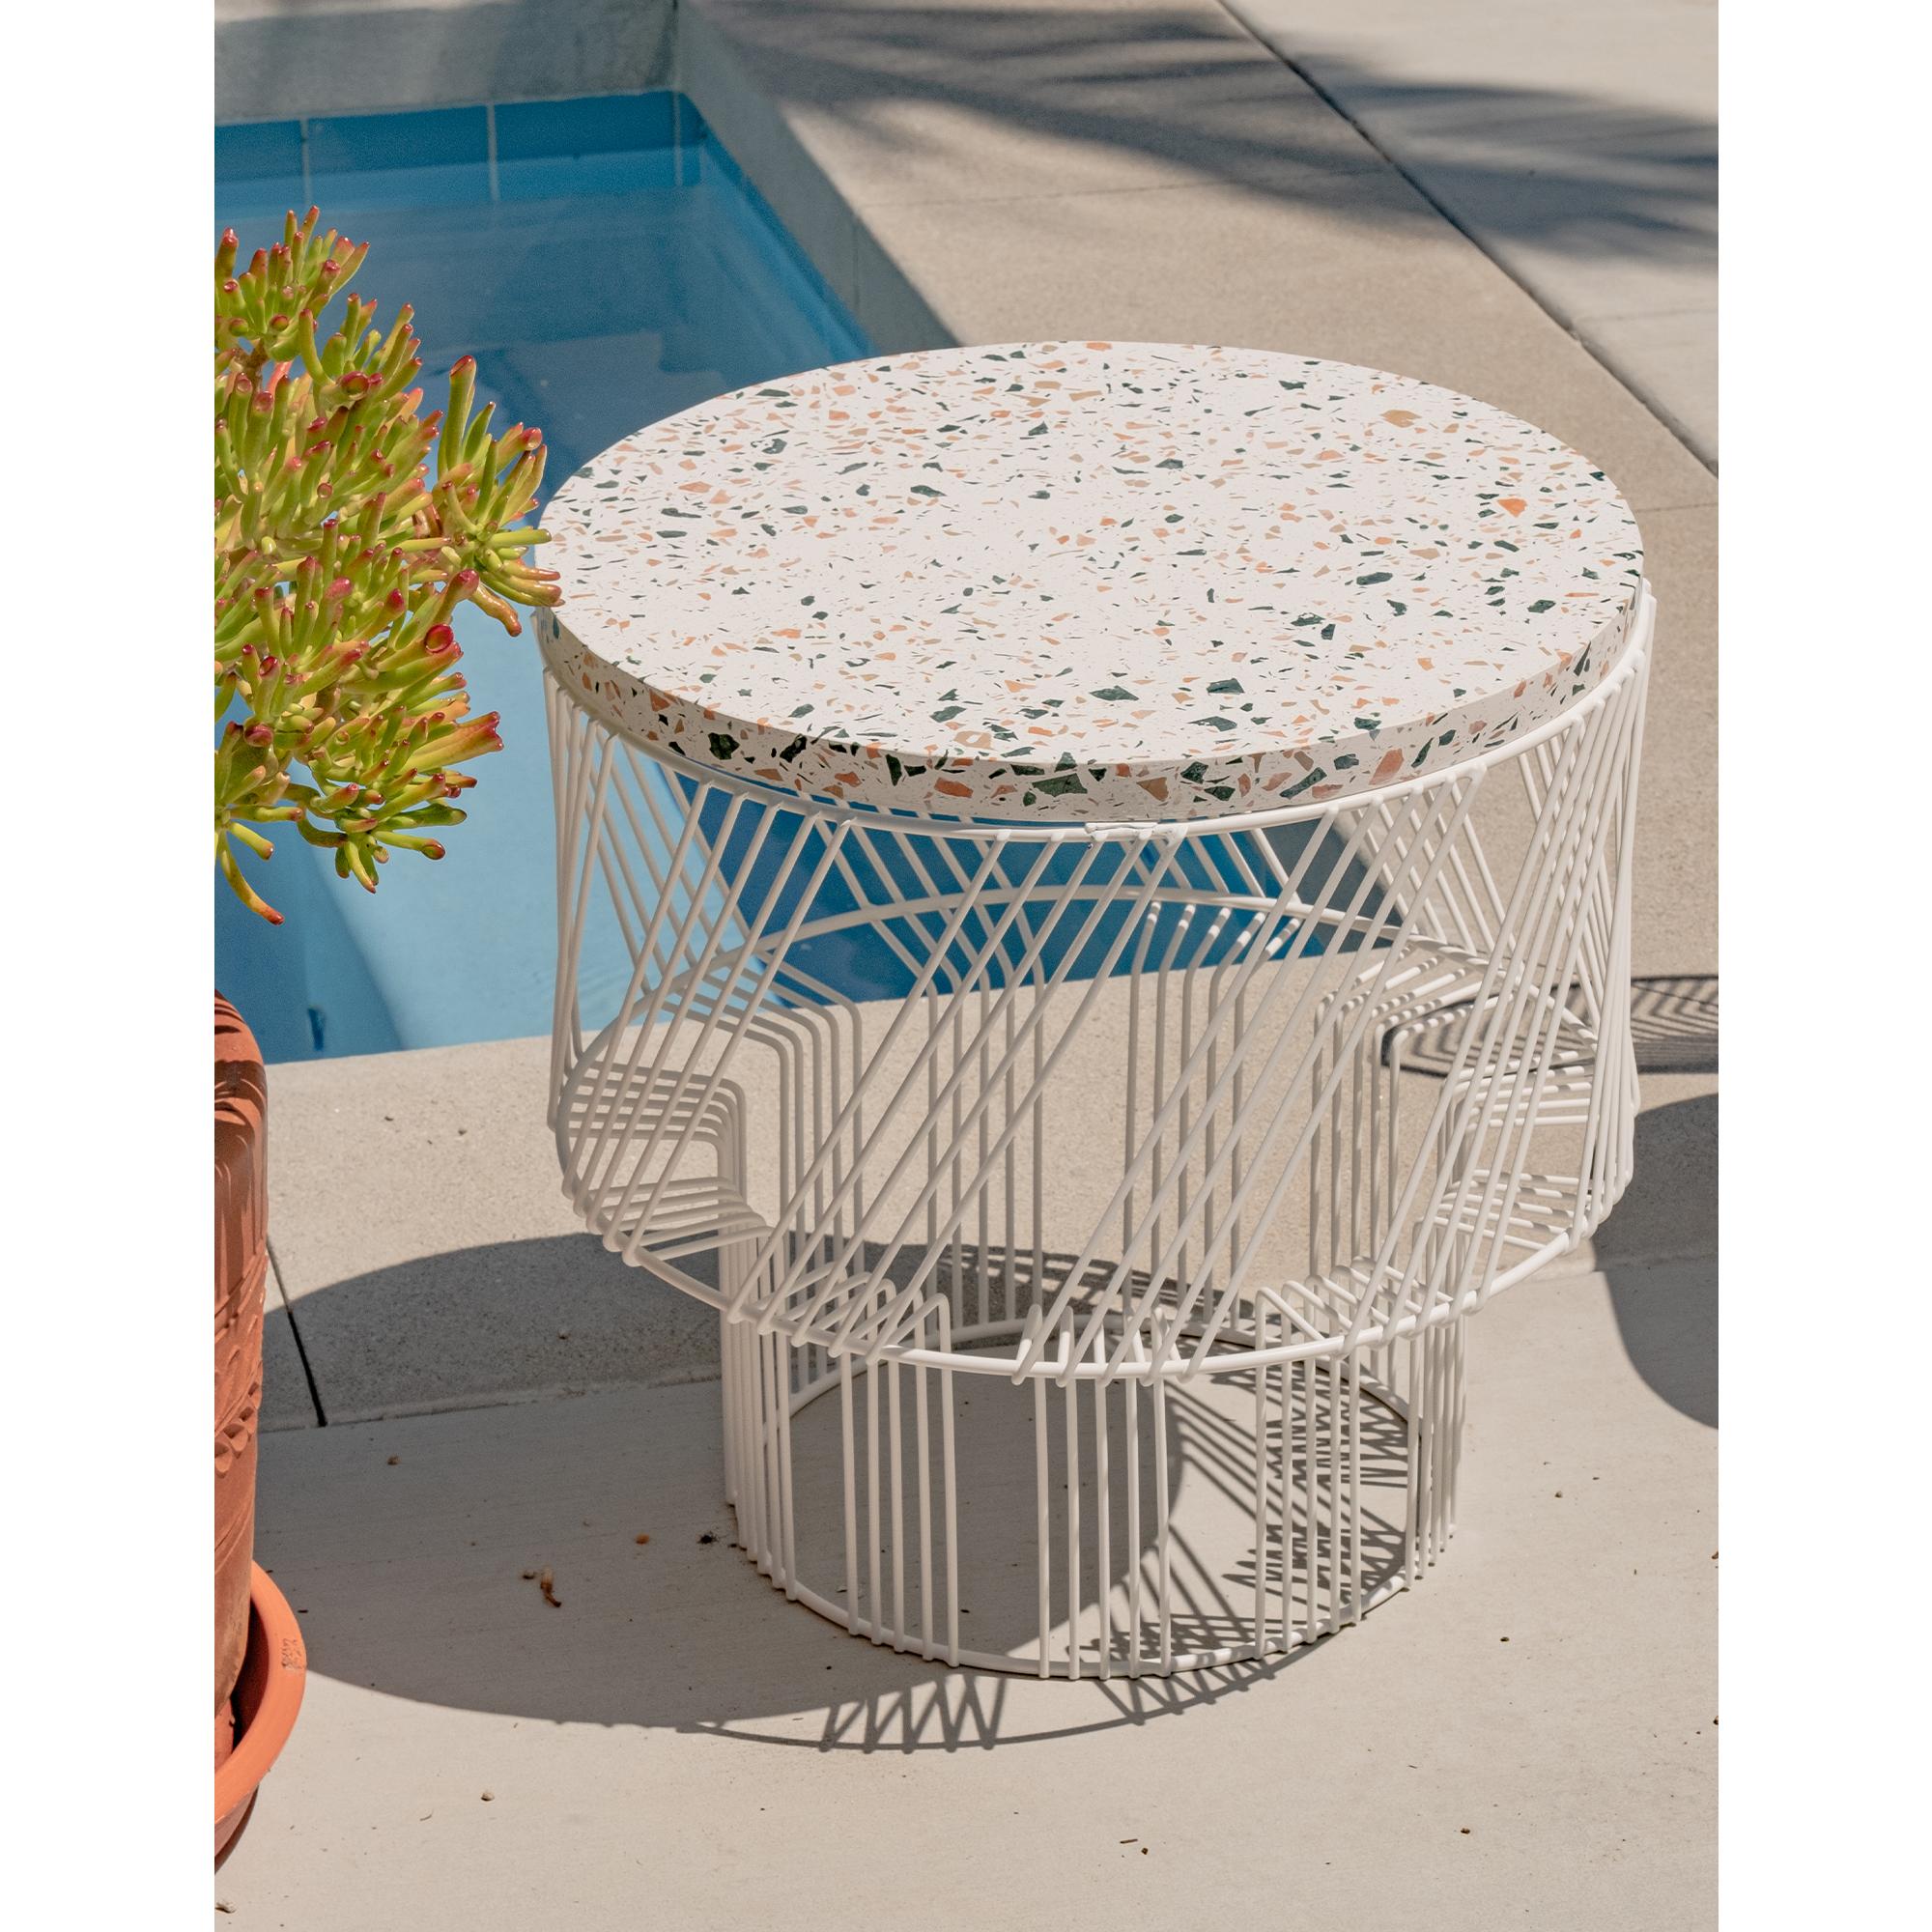 Bend Goods Wire Furniture
A modern wire side table with bold geometry and a concrete Terrazzo top, The Terrazzo table is a colorful and fun addition to any garden, interior, or commercial space.